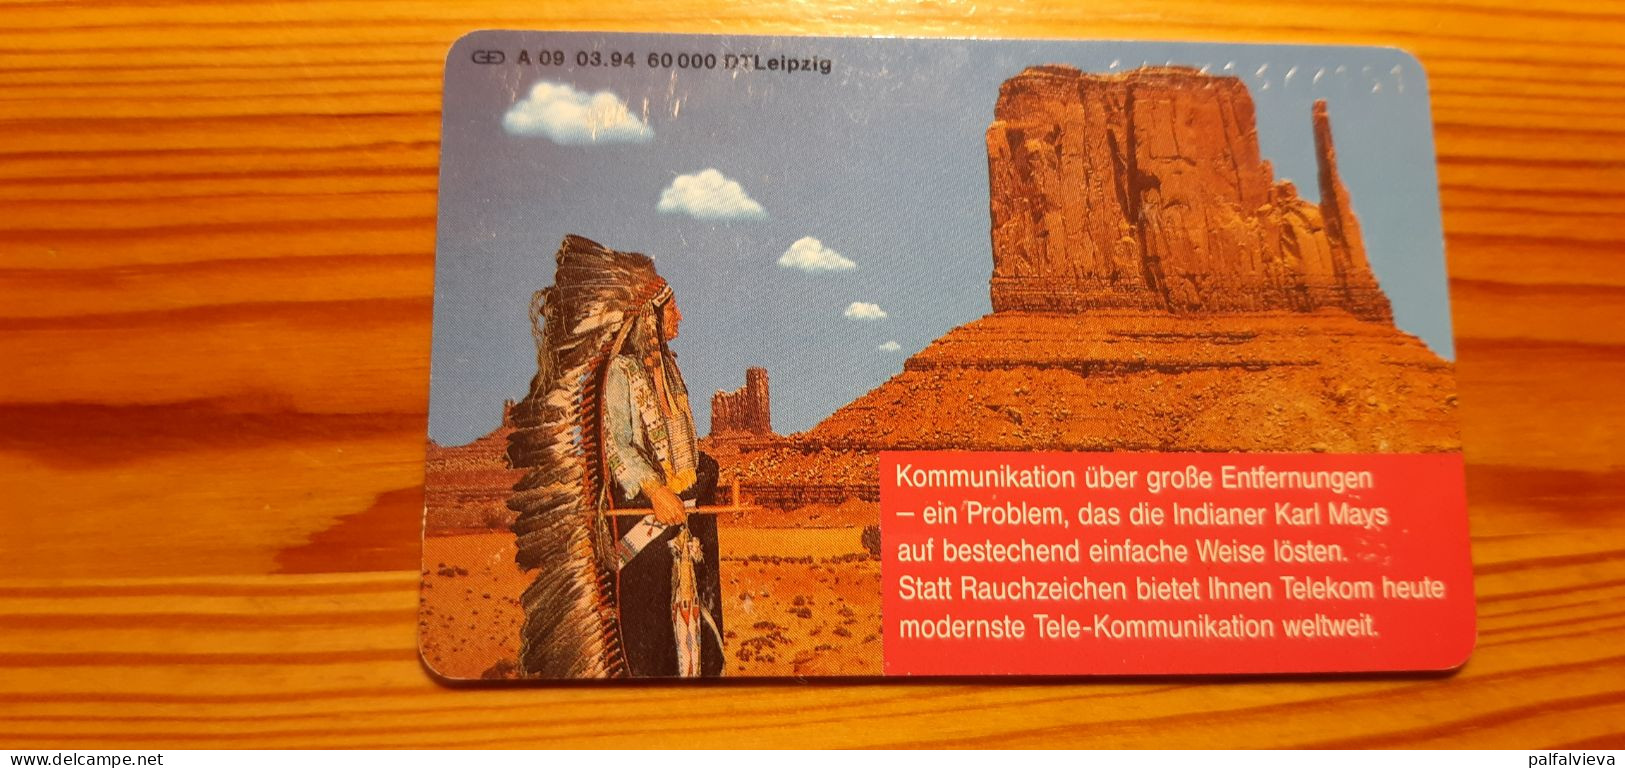 Phonecard Germany A 09 03.94. Karl May, Native American, USA 60.000 Ex. - A + AD-Series : Publicitaires - D. Telekom AG